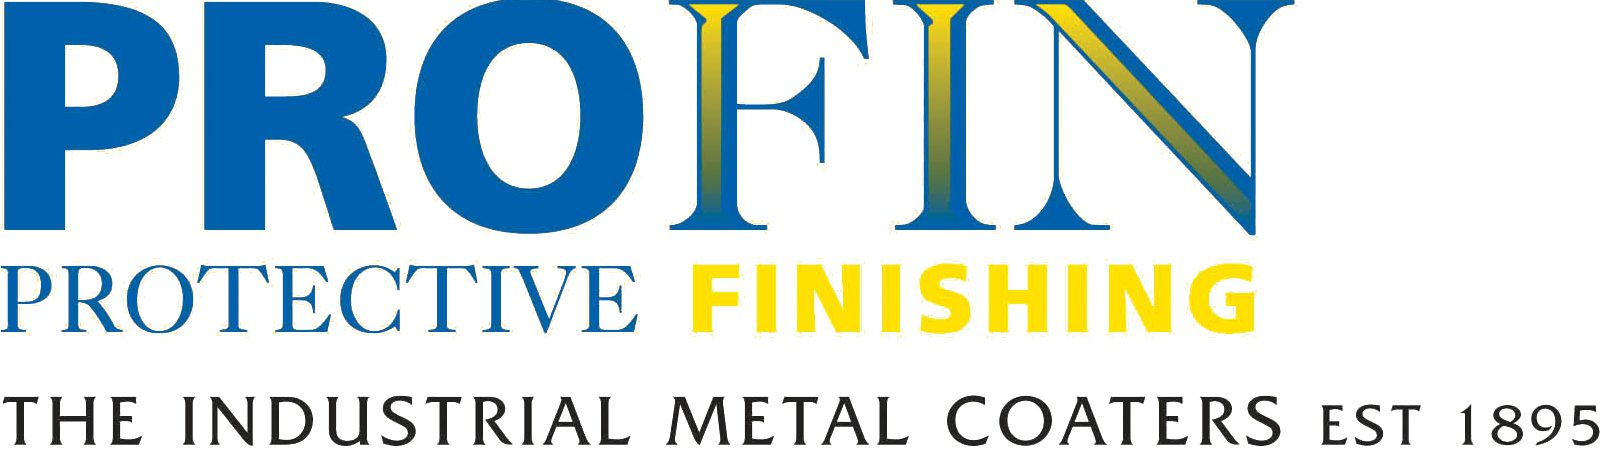 Logo of Profin Protective Finishing Ltd Metal Finishing Services In Redditch, Worcestershire